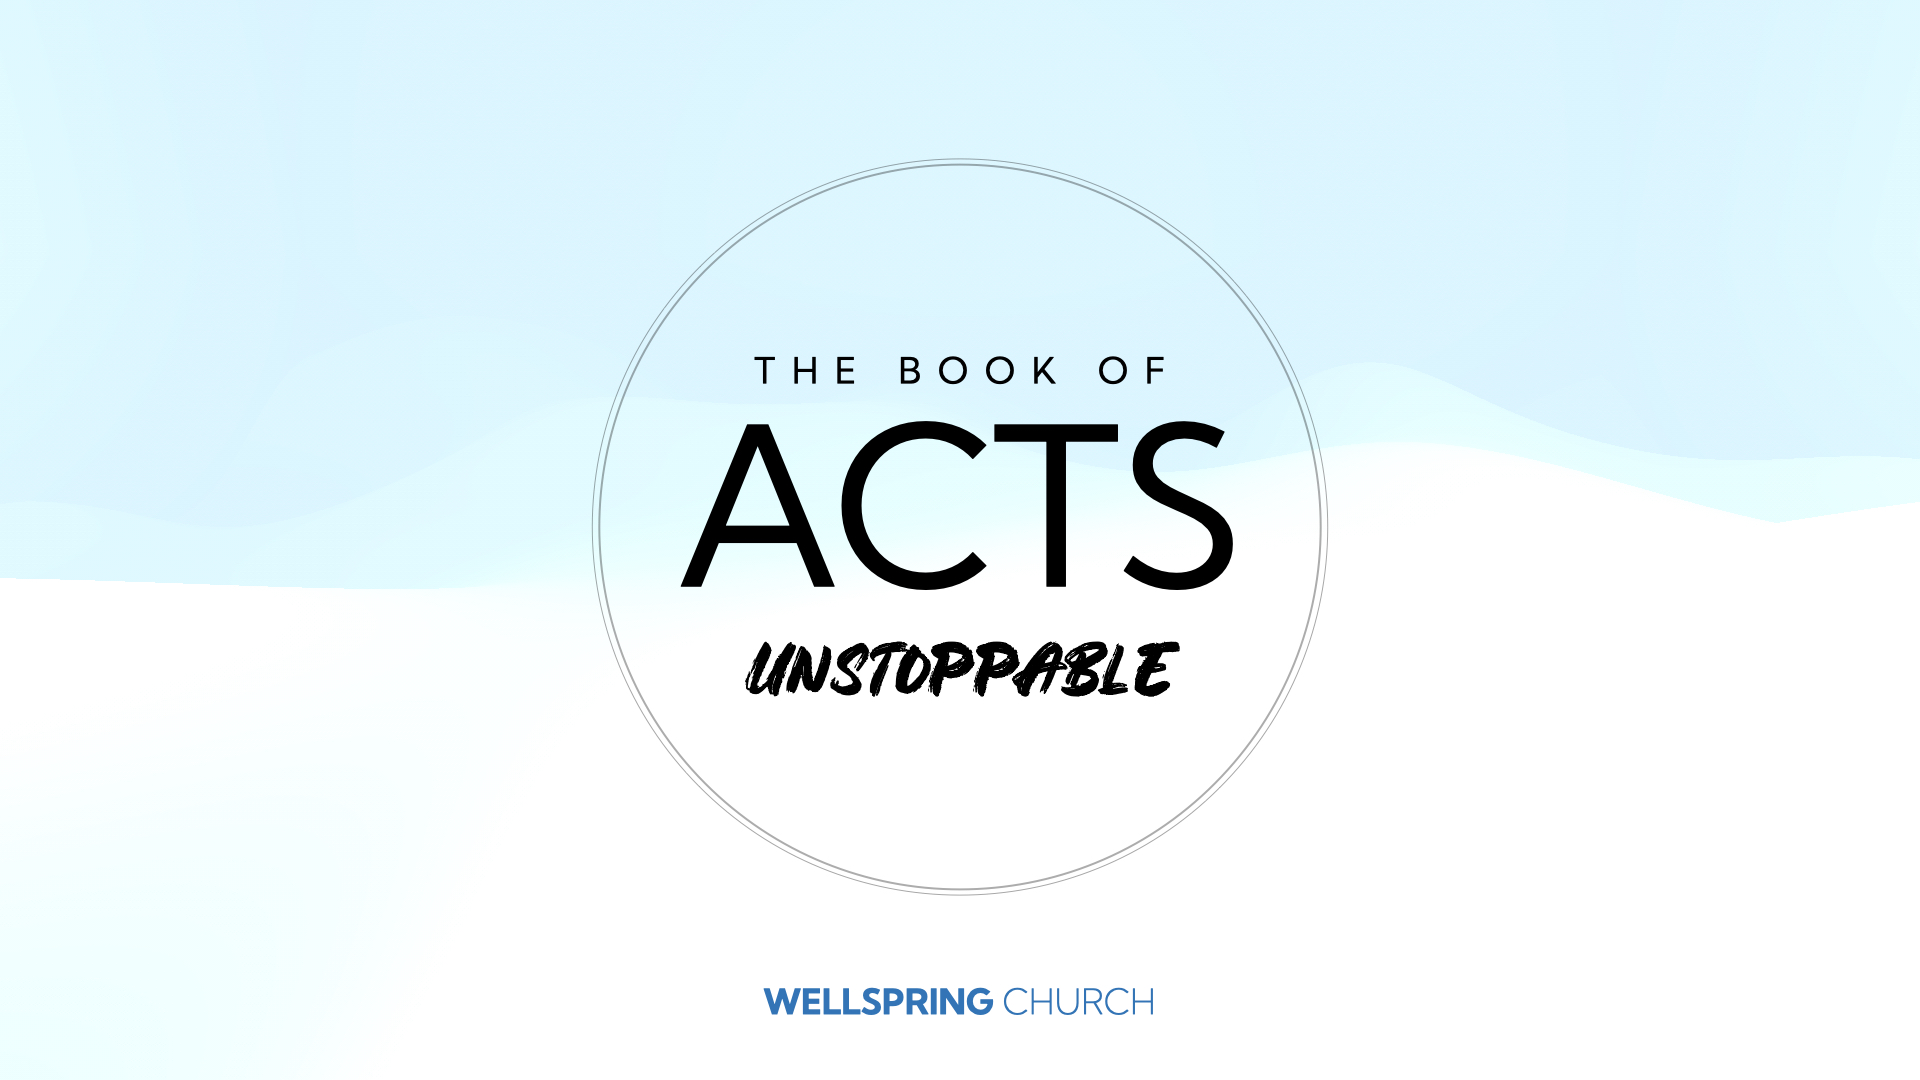 The book of acts : unstoppable